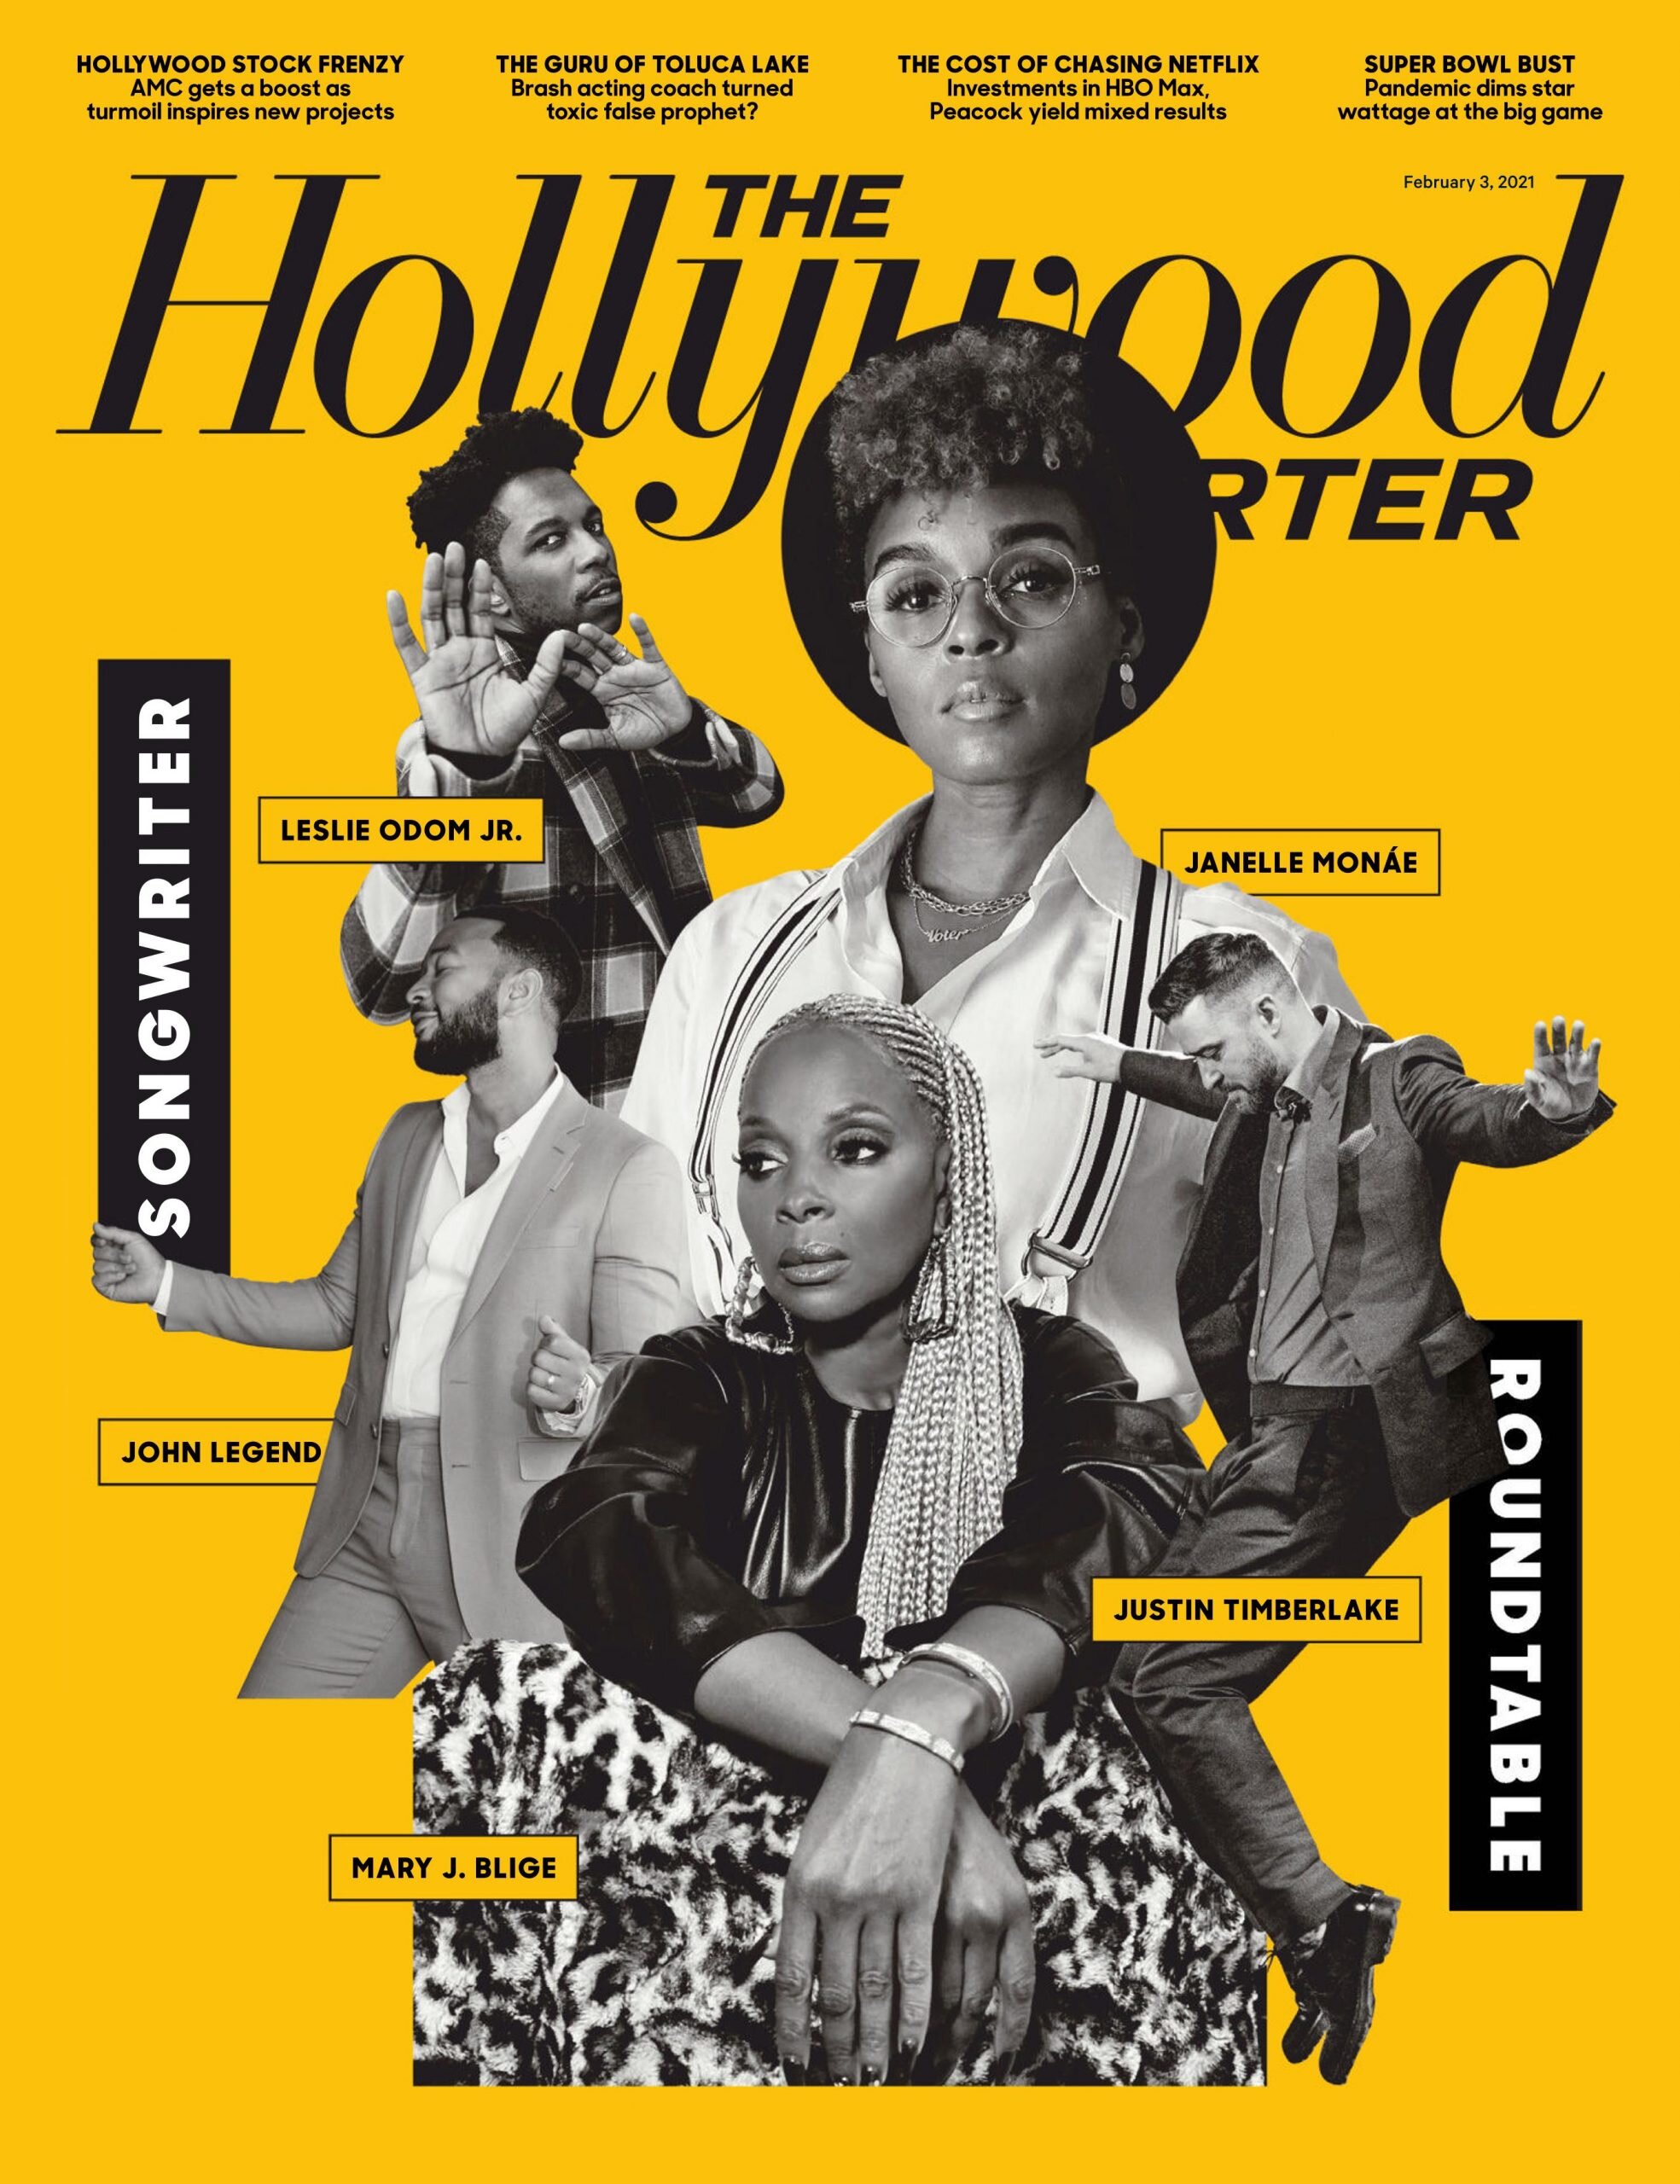 The_Hollywood_Reporter_-_February_03_2021-scaled.jpg